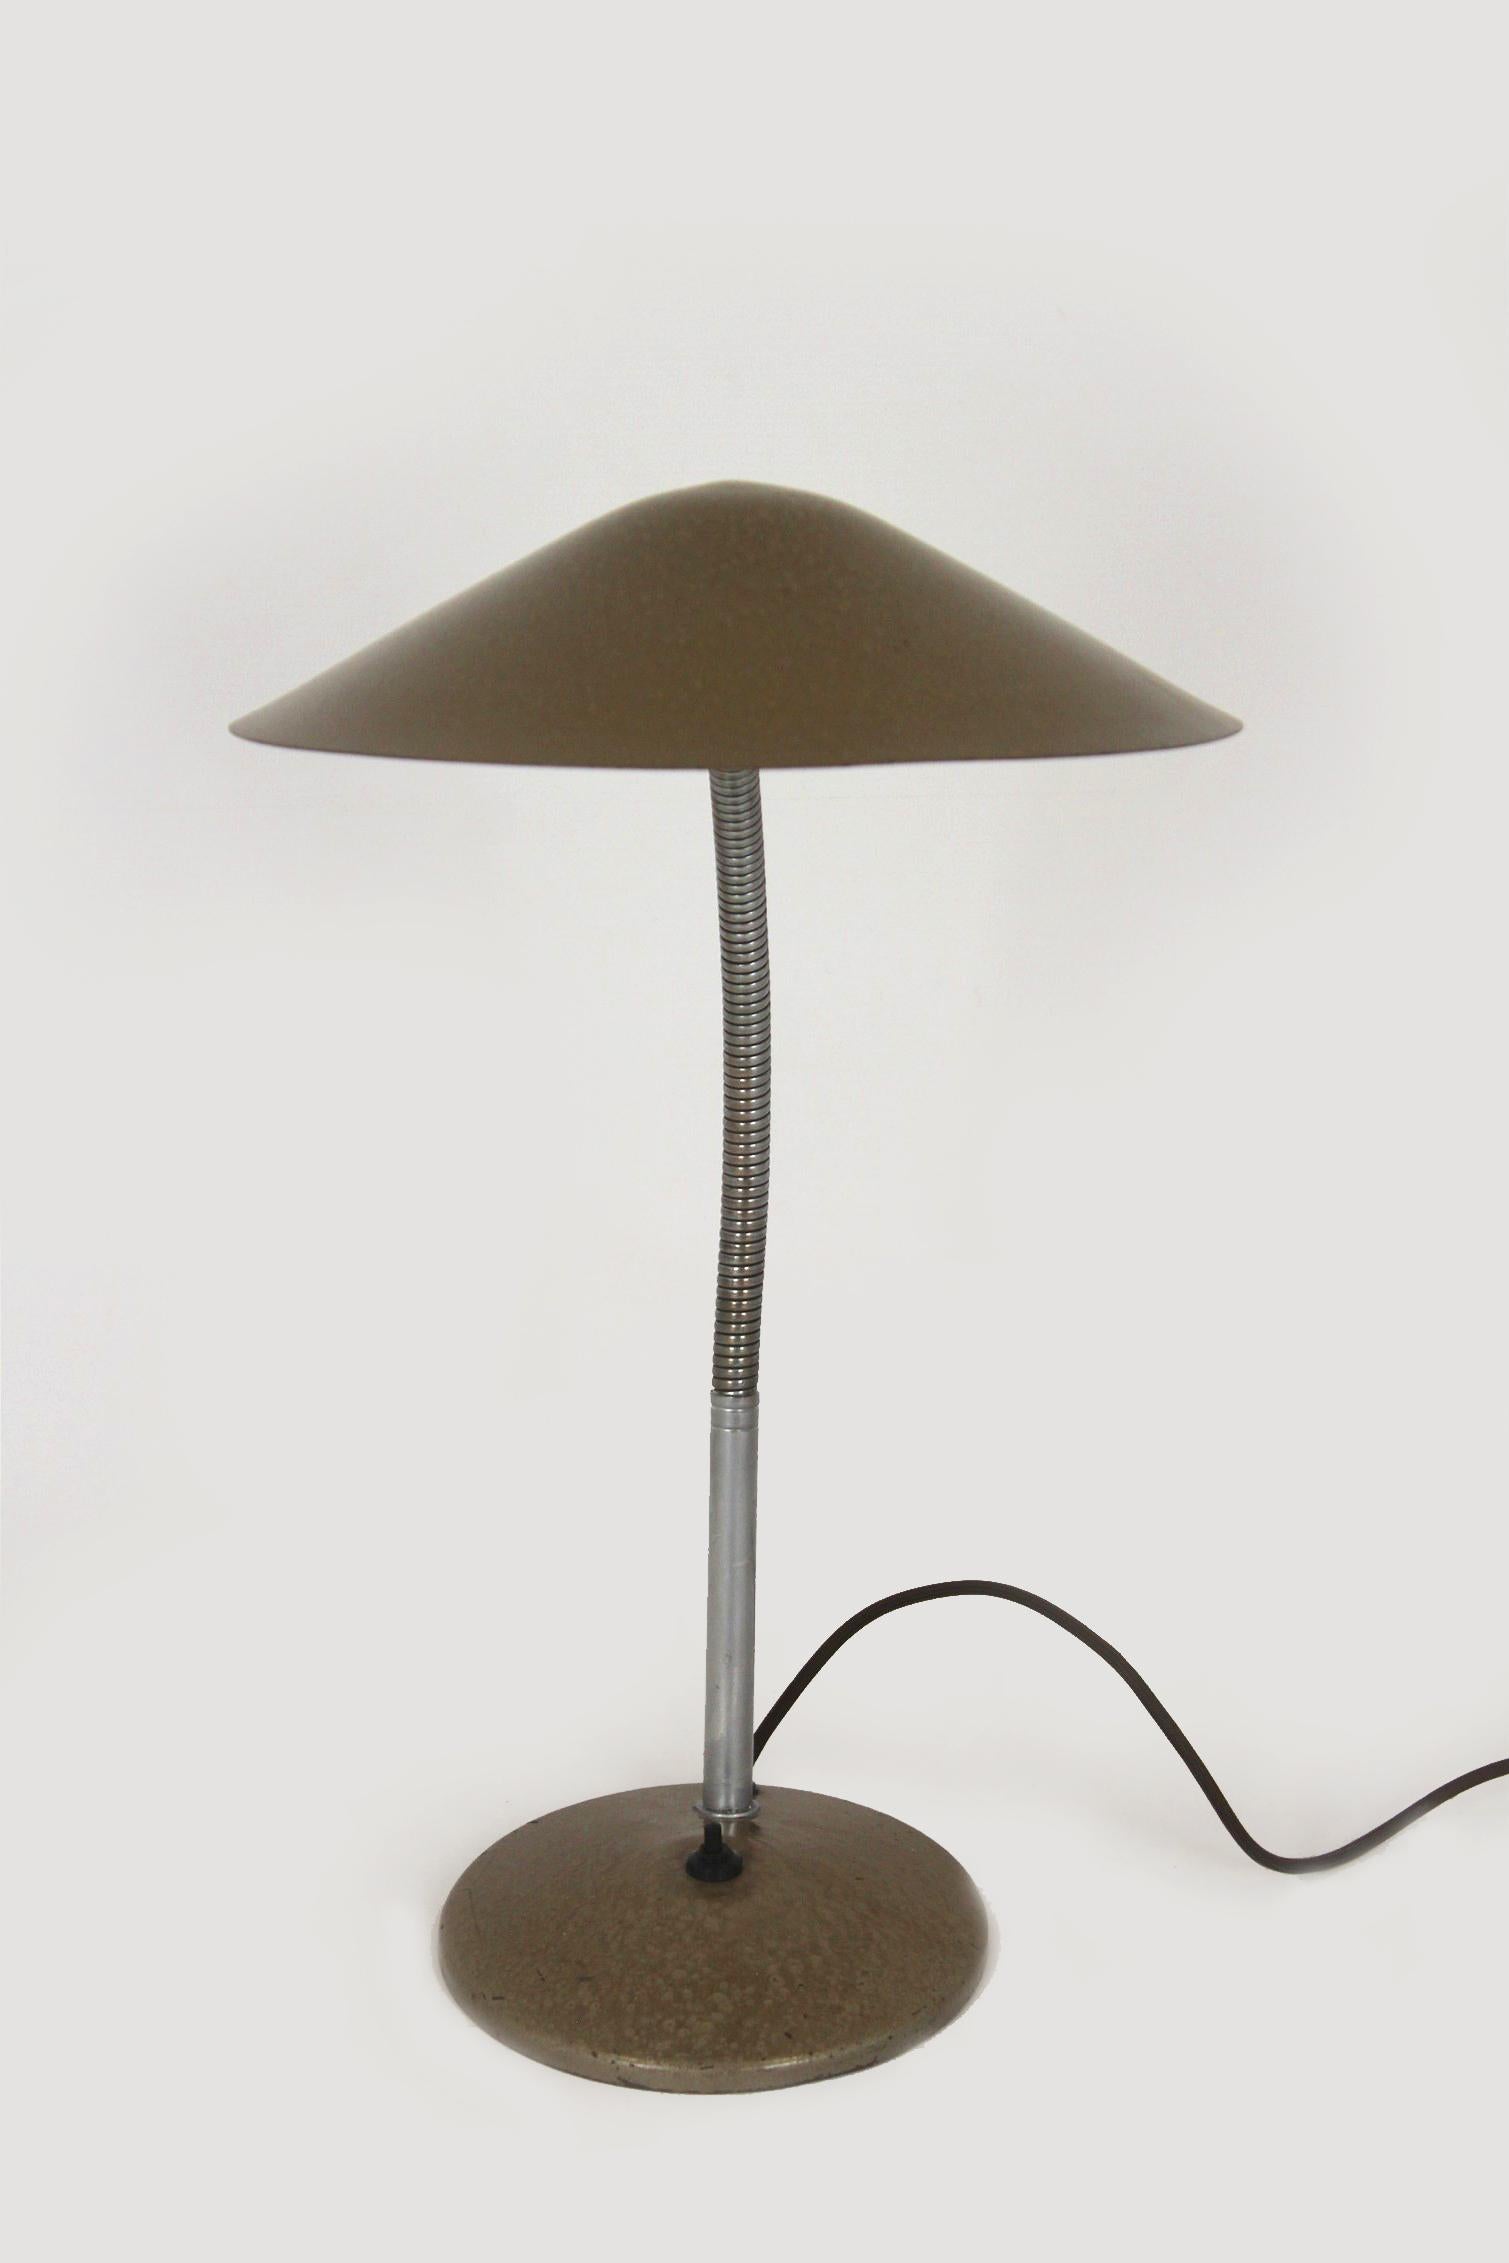 Large Industrial Bauhaus Style Table Lamp, 1940s For Sale 6